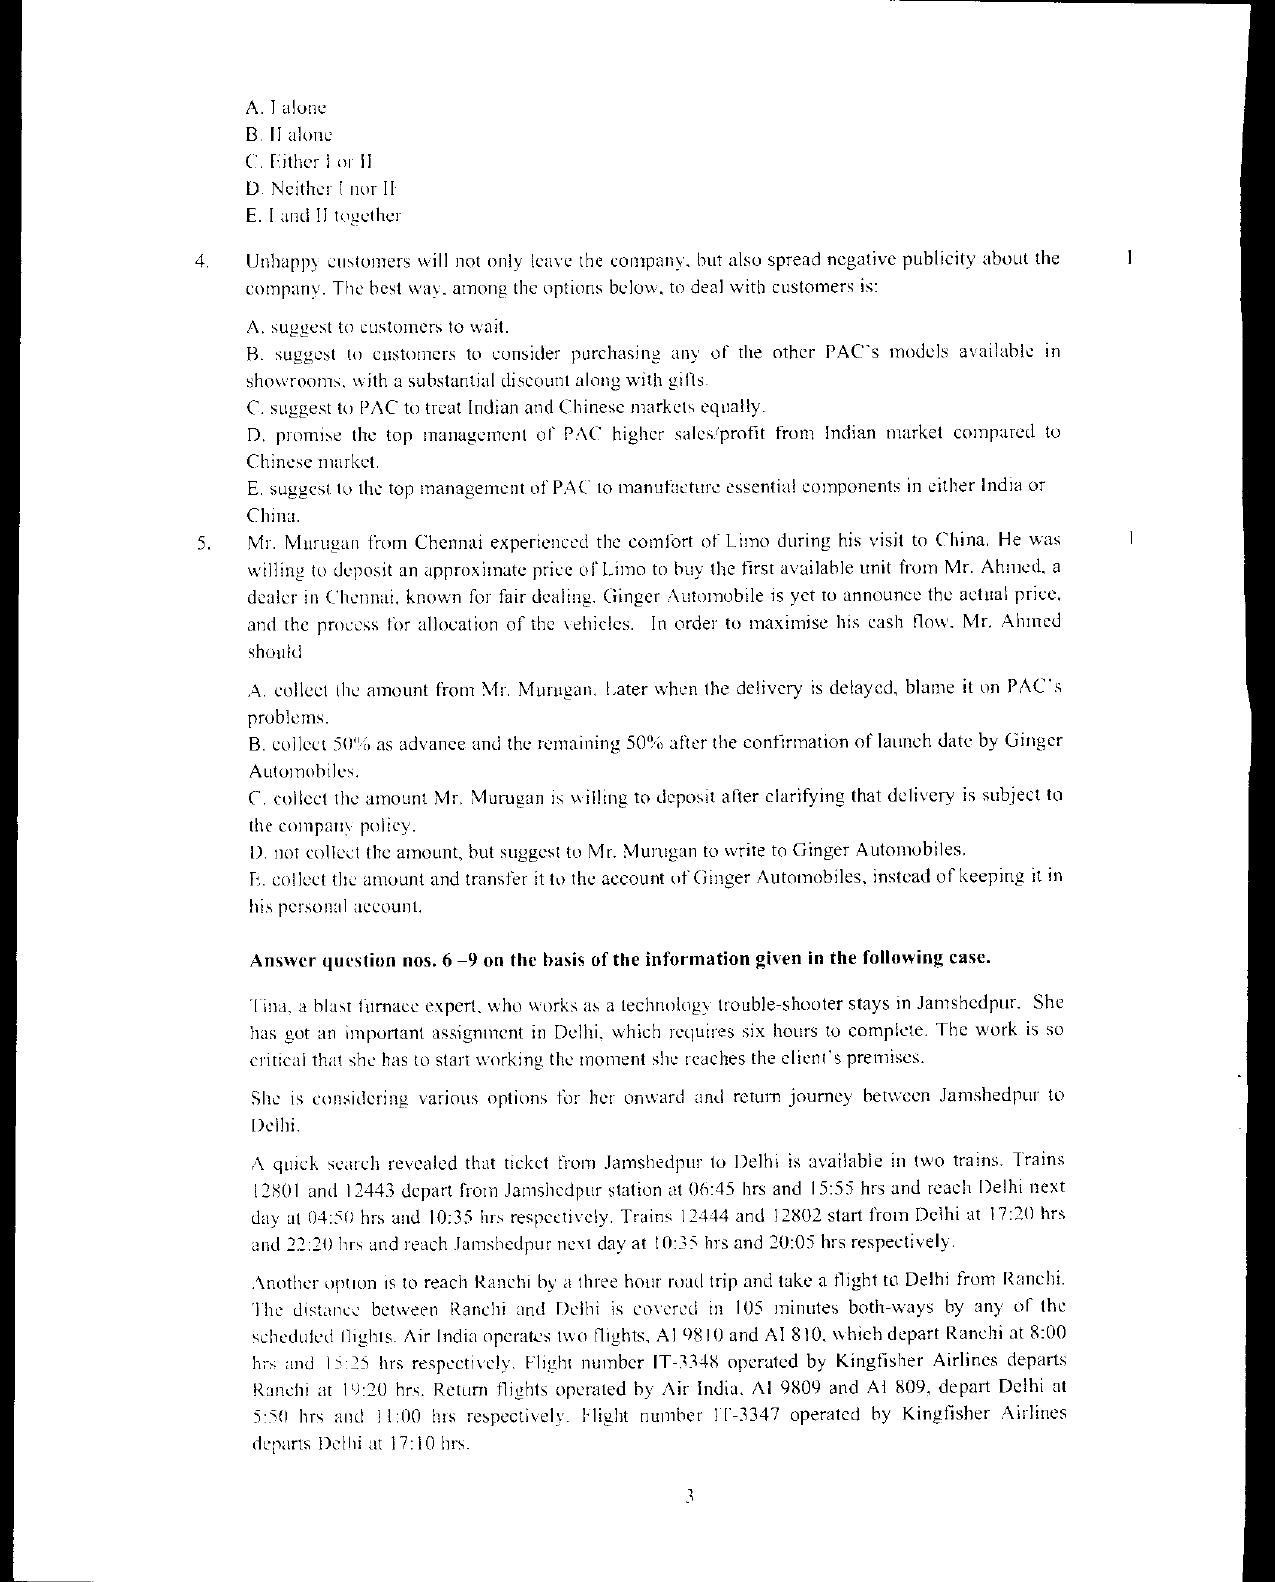 XAT 2012 Question Papers - Page 4